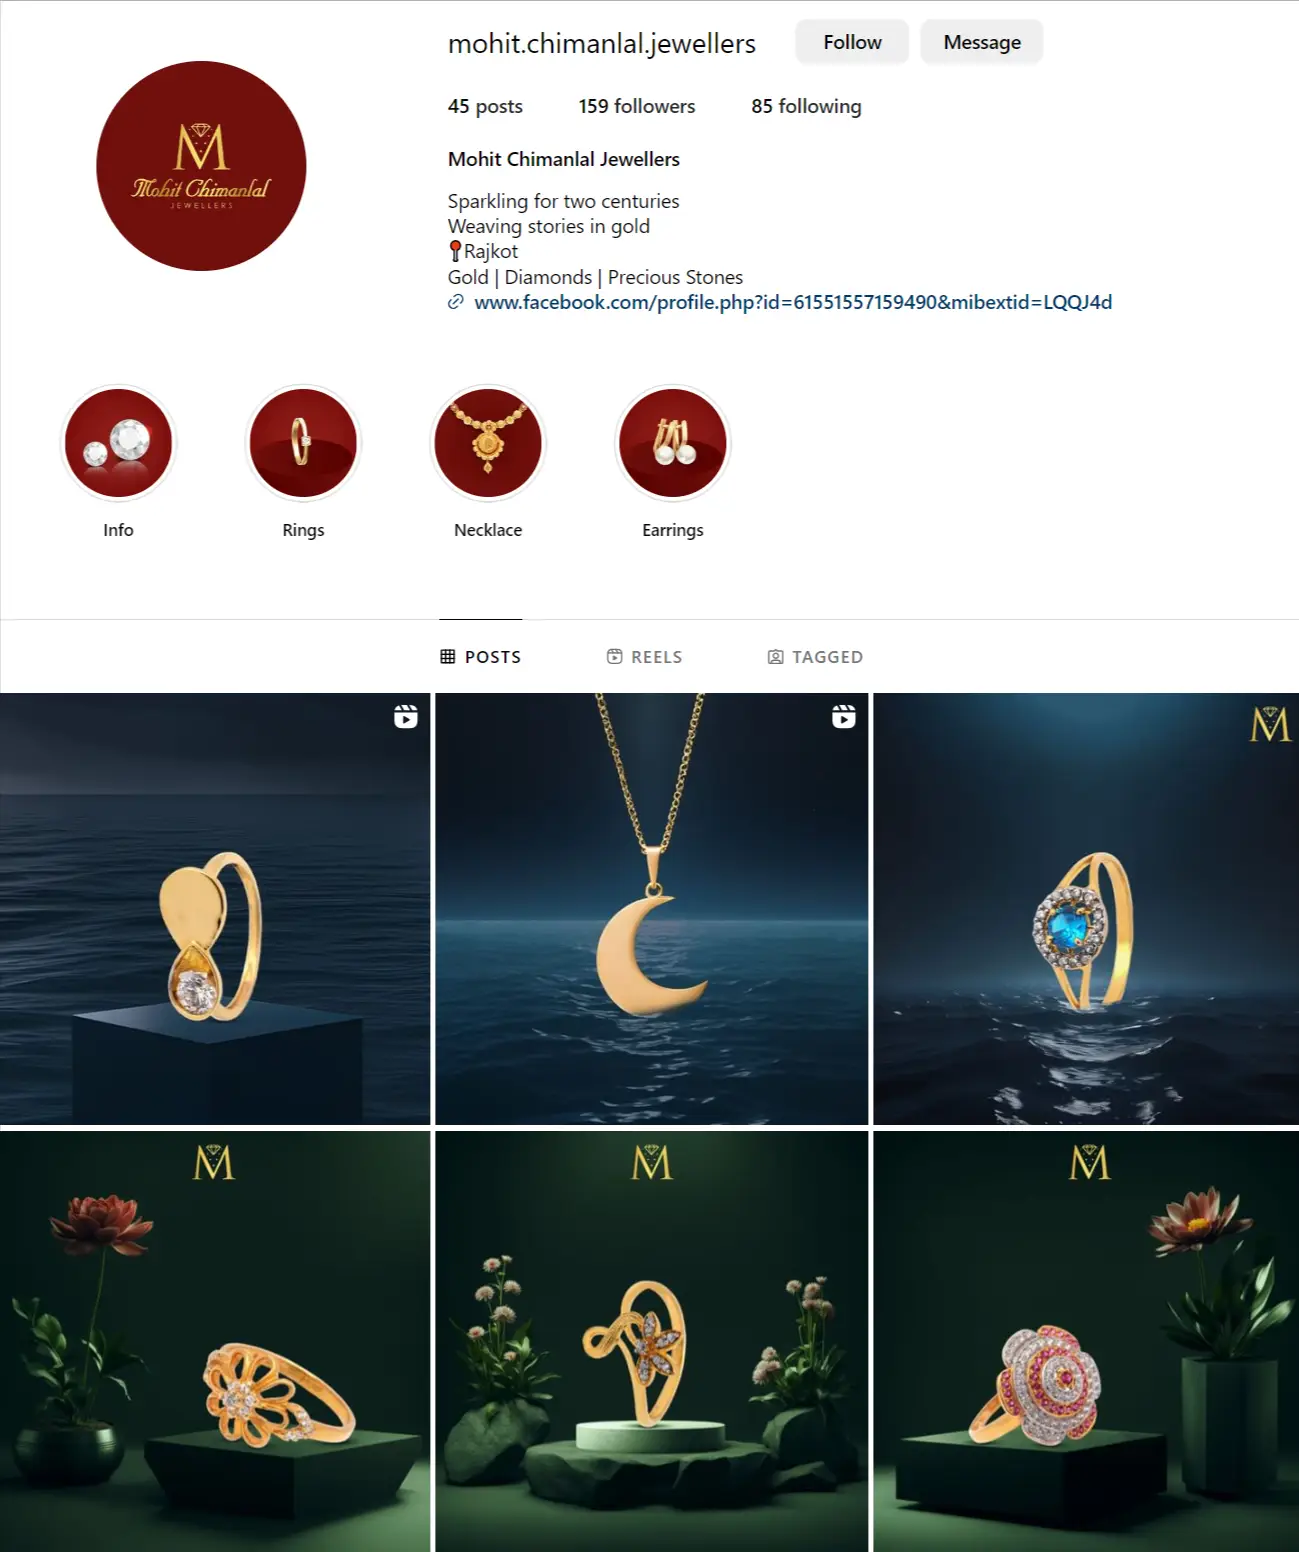 Instagram account of Mohit Chimanlal Jewellers